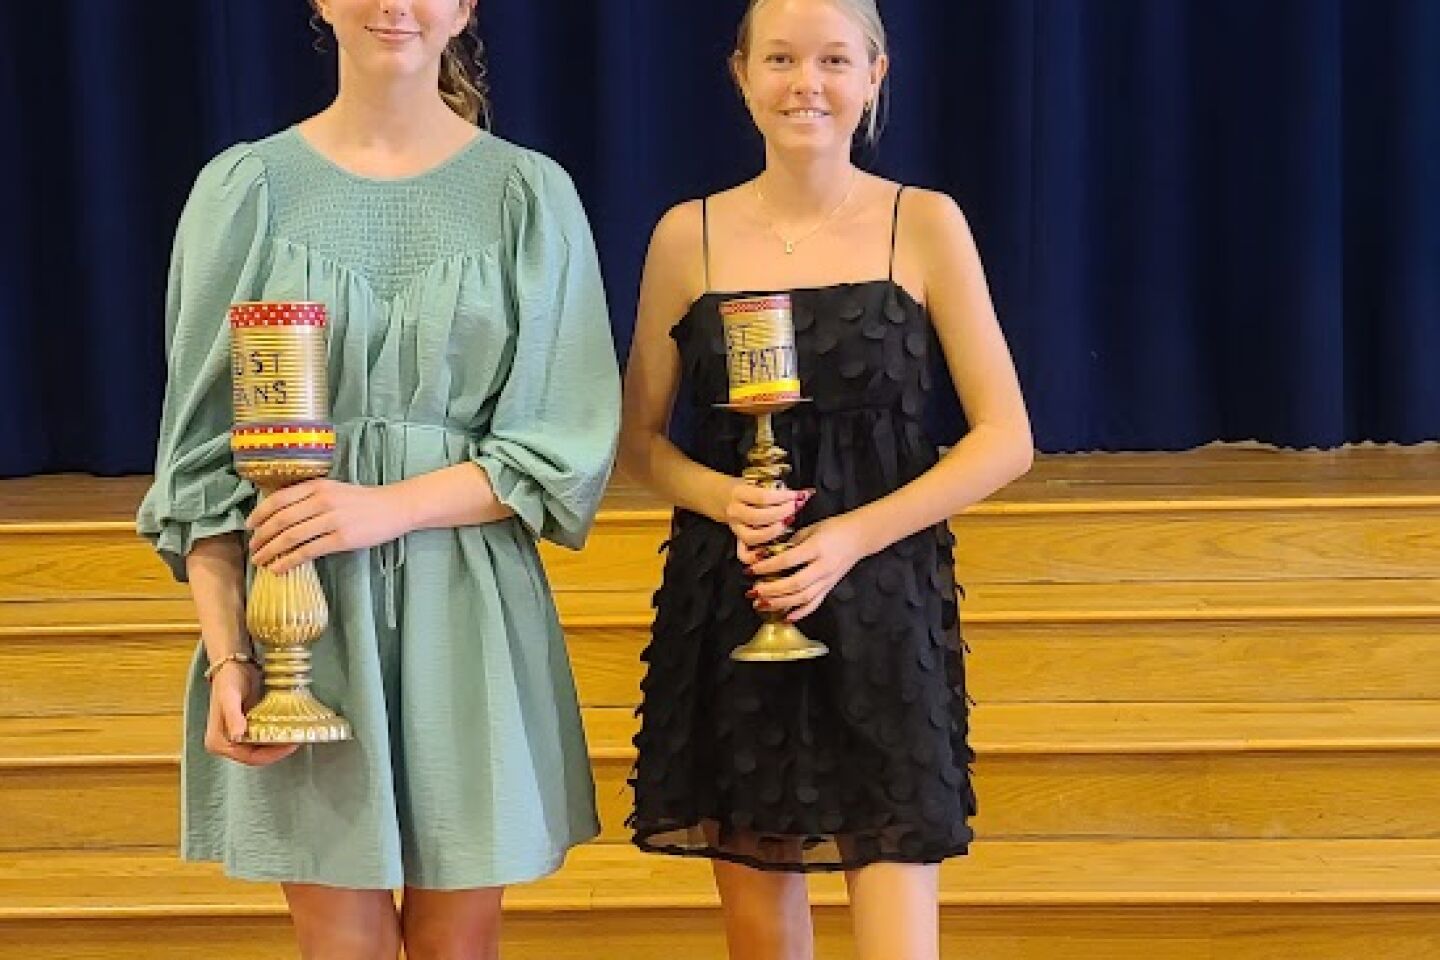 We Can food drive winners Lillie Epich and Ellery Dismore.jpg